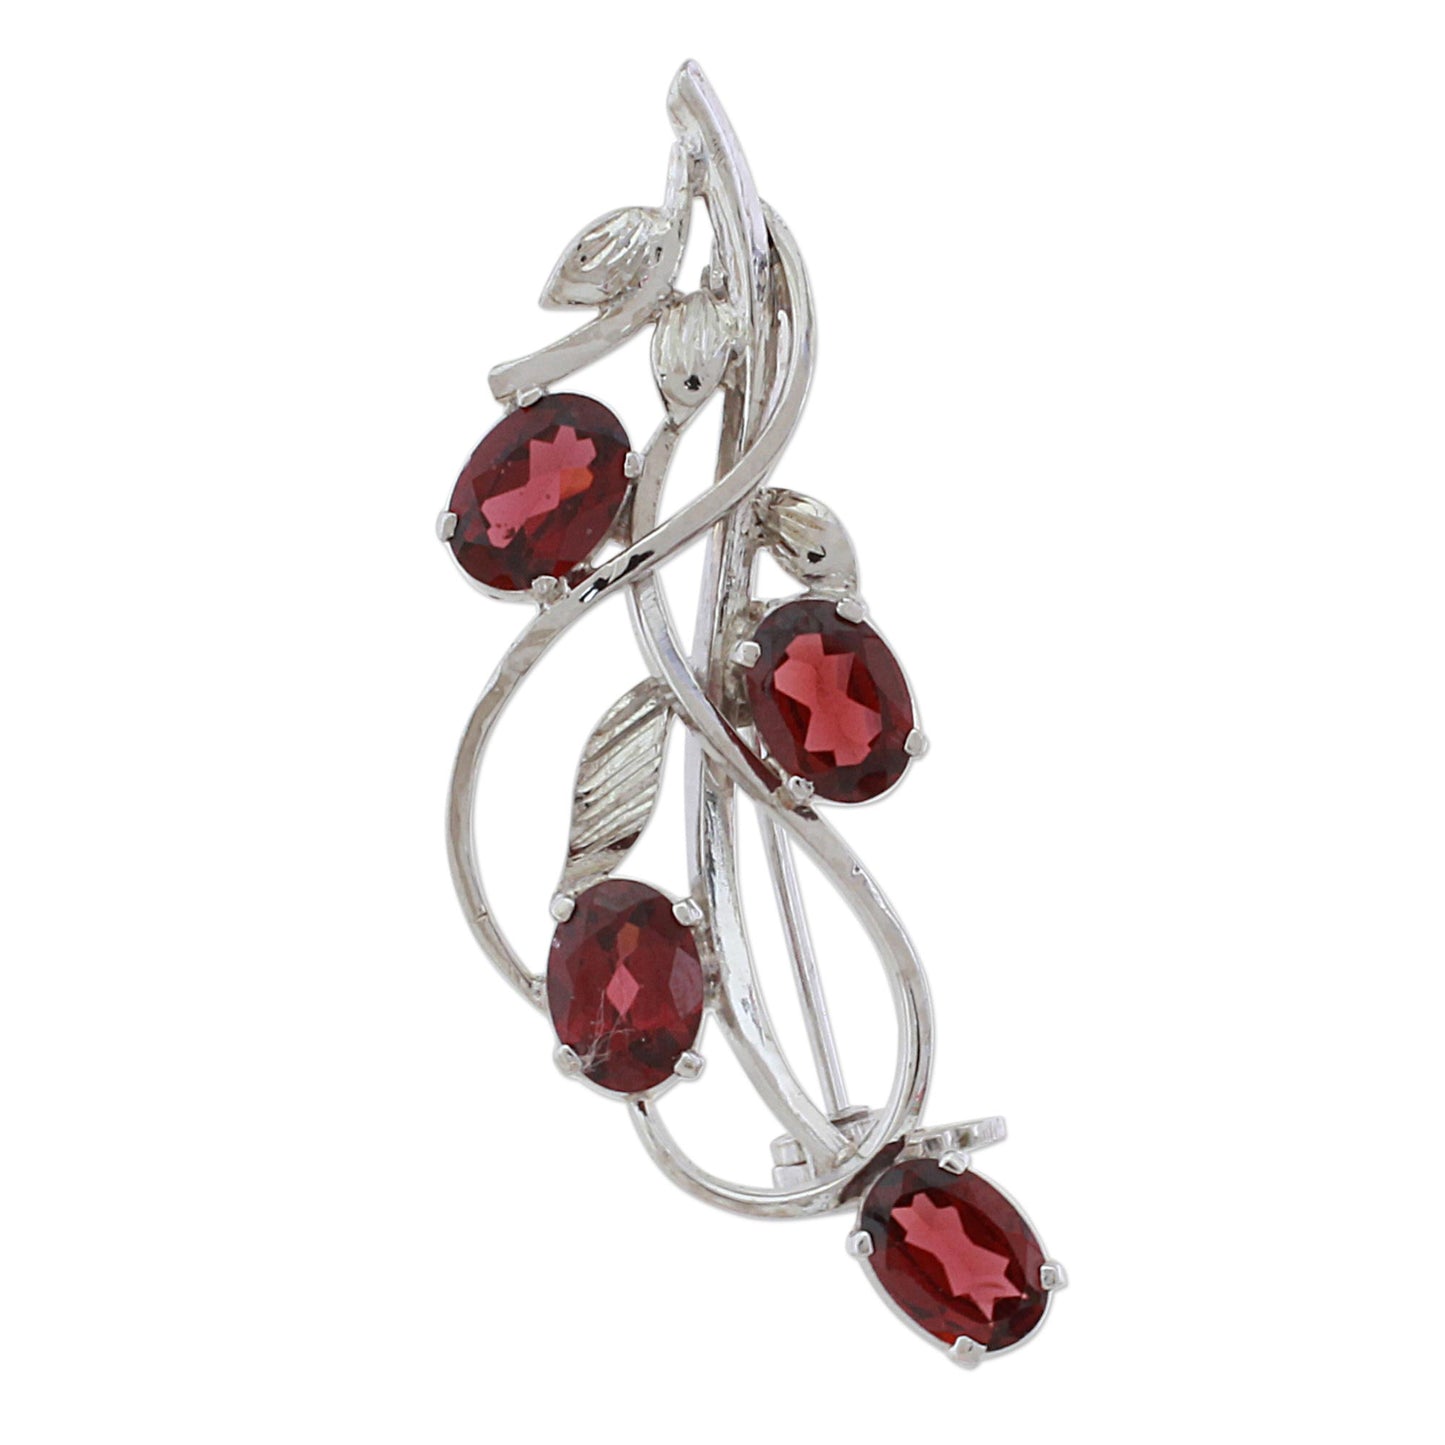 Taste of Autumn Garnet and Sterling Silver Leafy Brooch from India